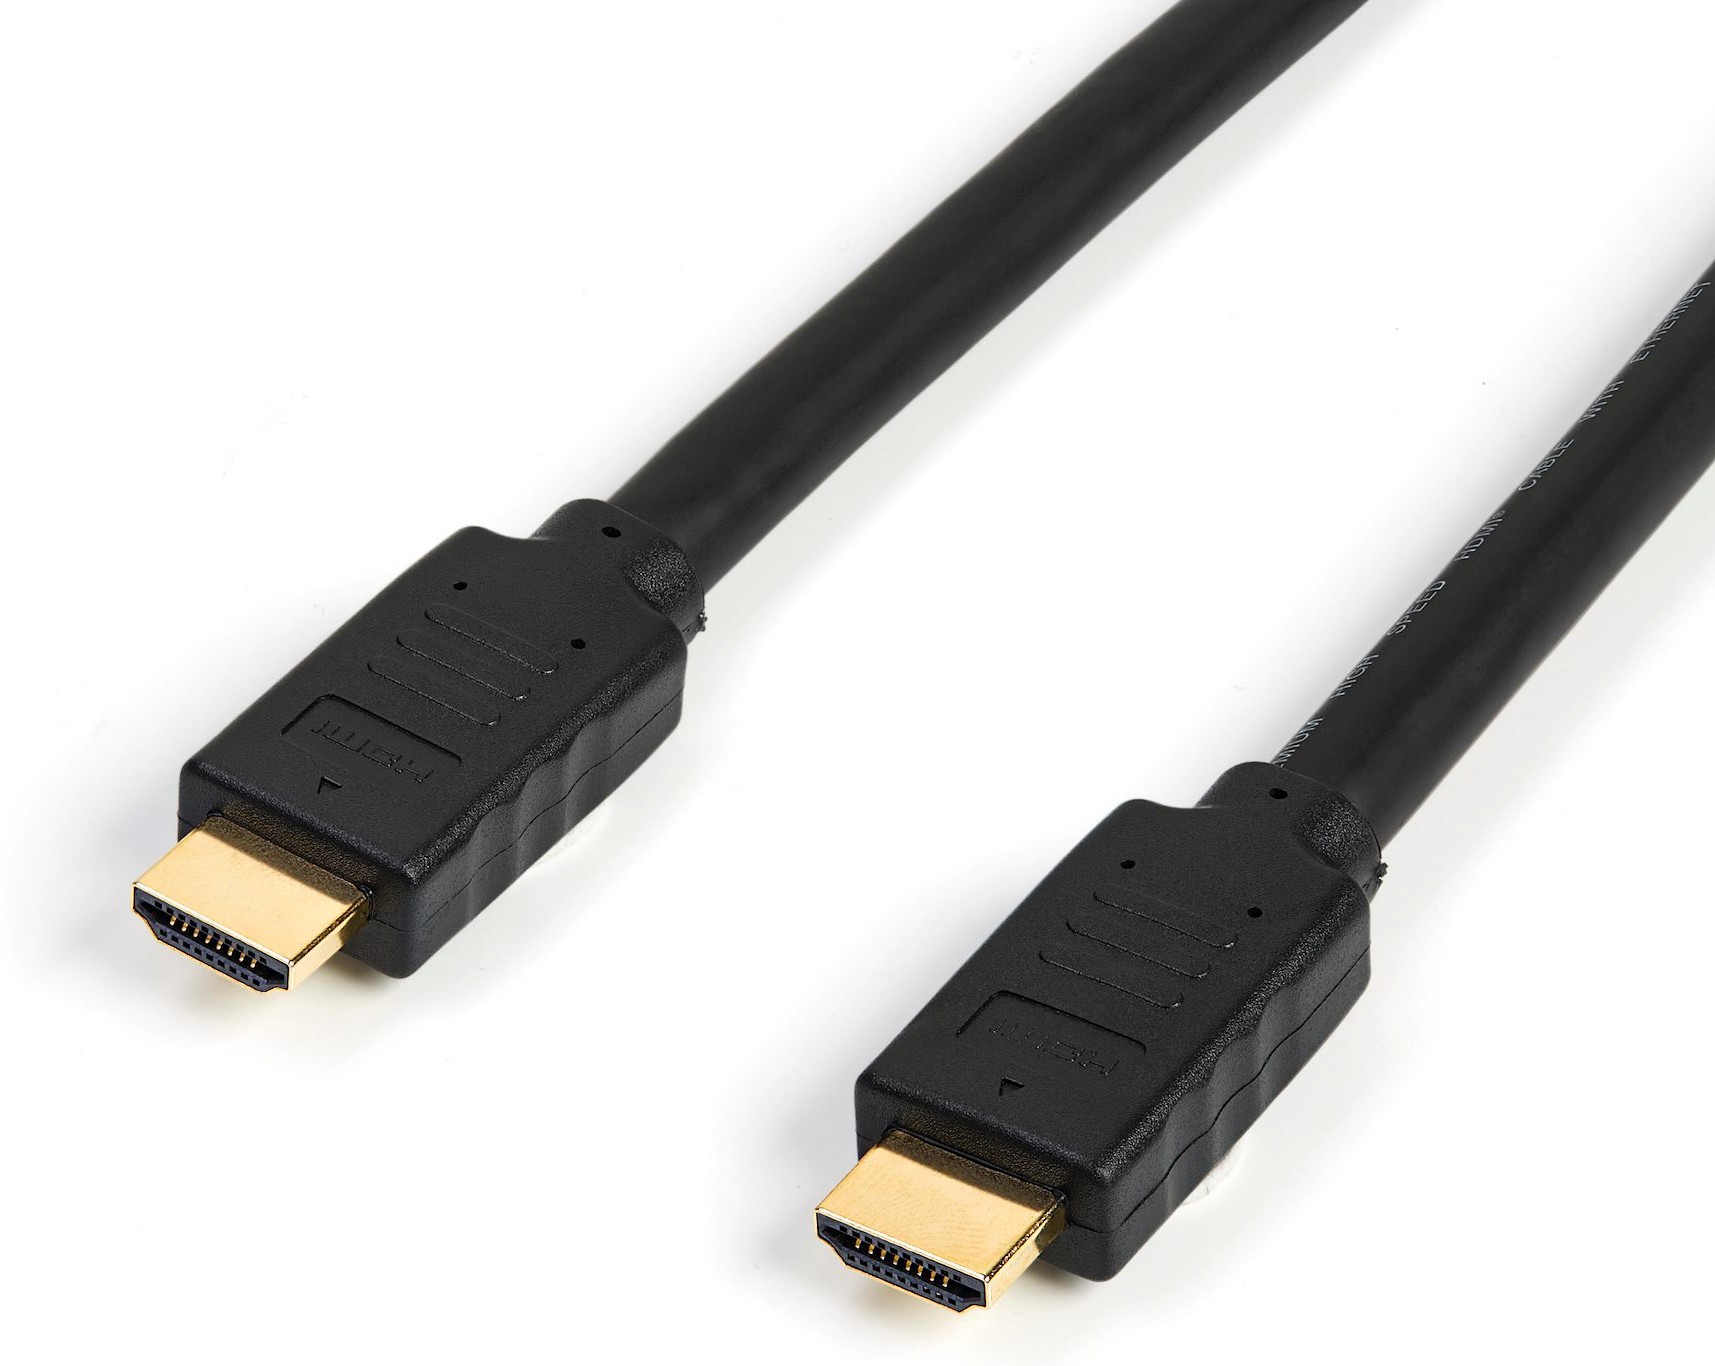 6.6ft (2m) Slim HDMI 2.0 Cable, 4K 60Hz Premium Certified Slim High Speed  HDMI Cable w/ Ethernet, CL2 Rated, Slim HDMI Cable/Cord for